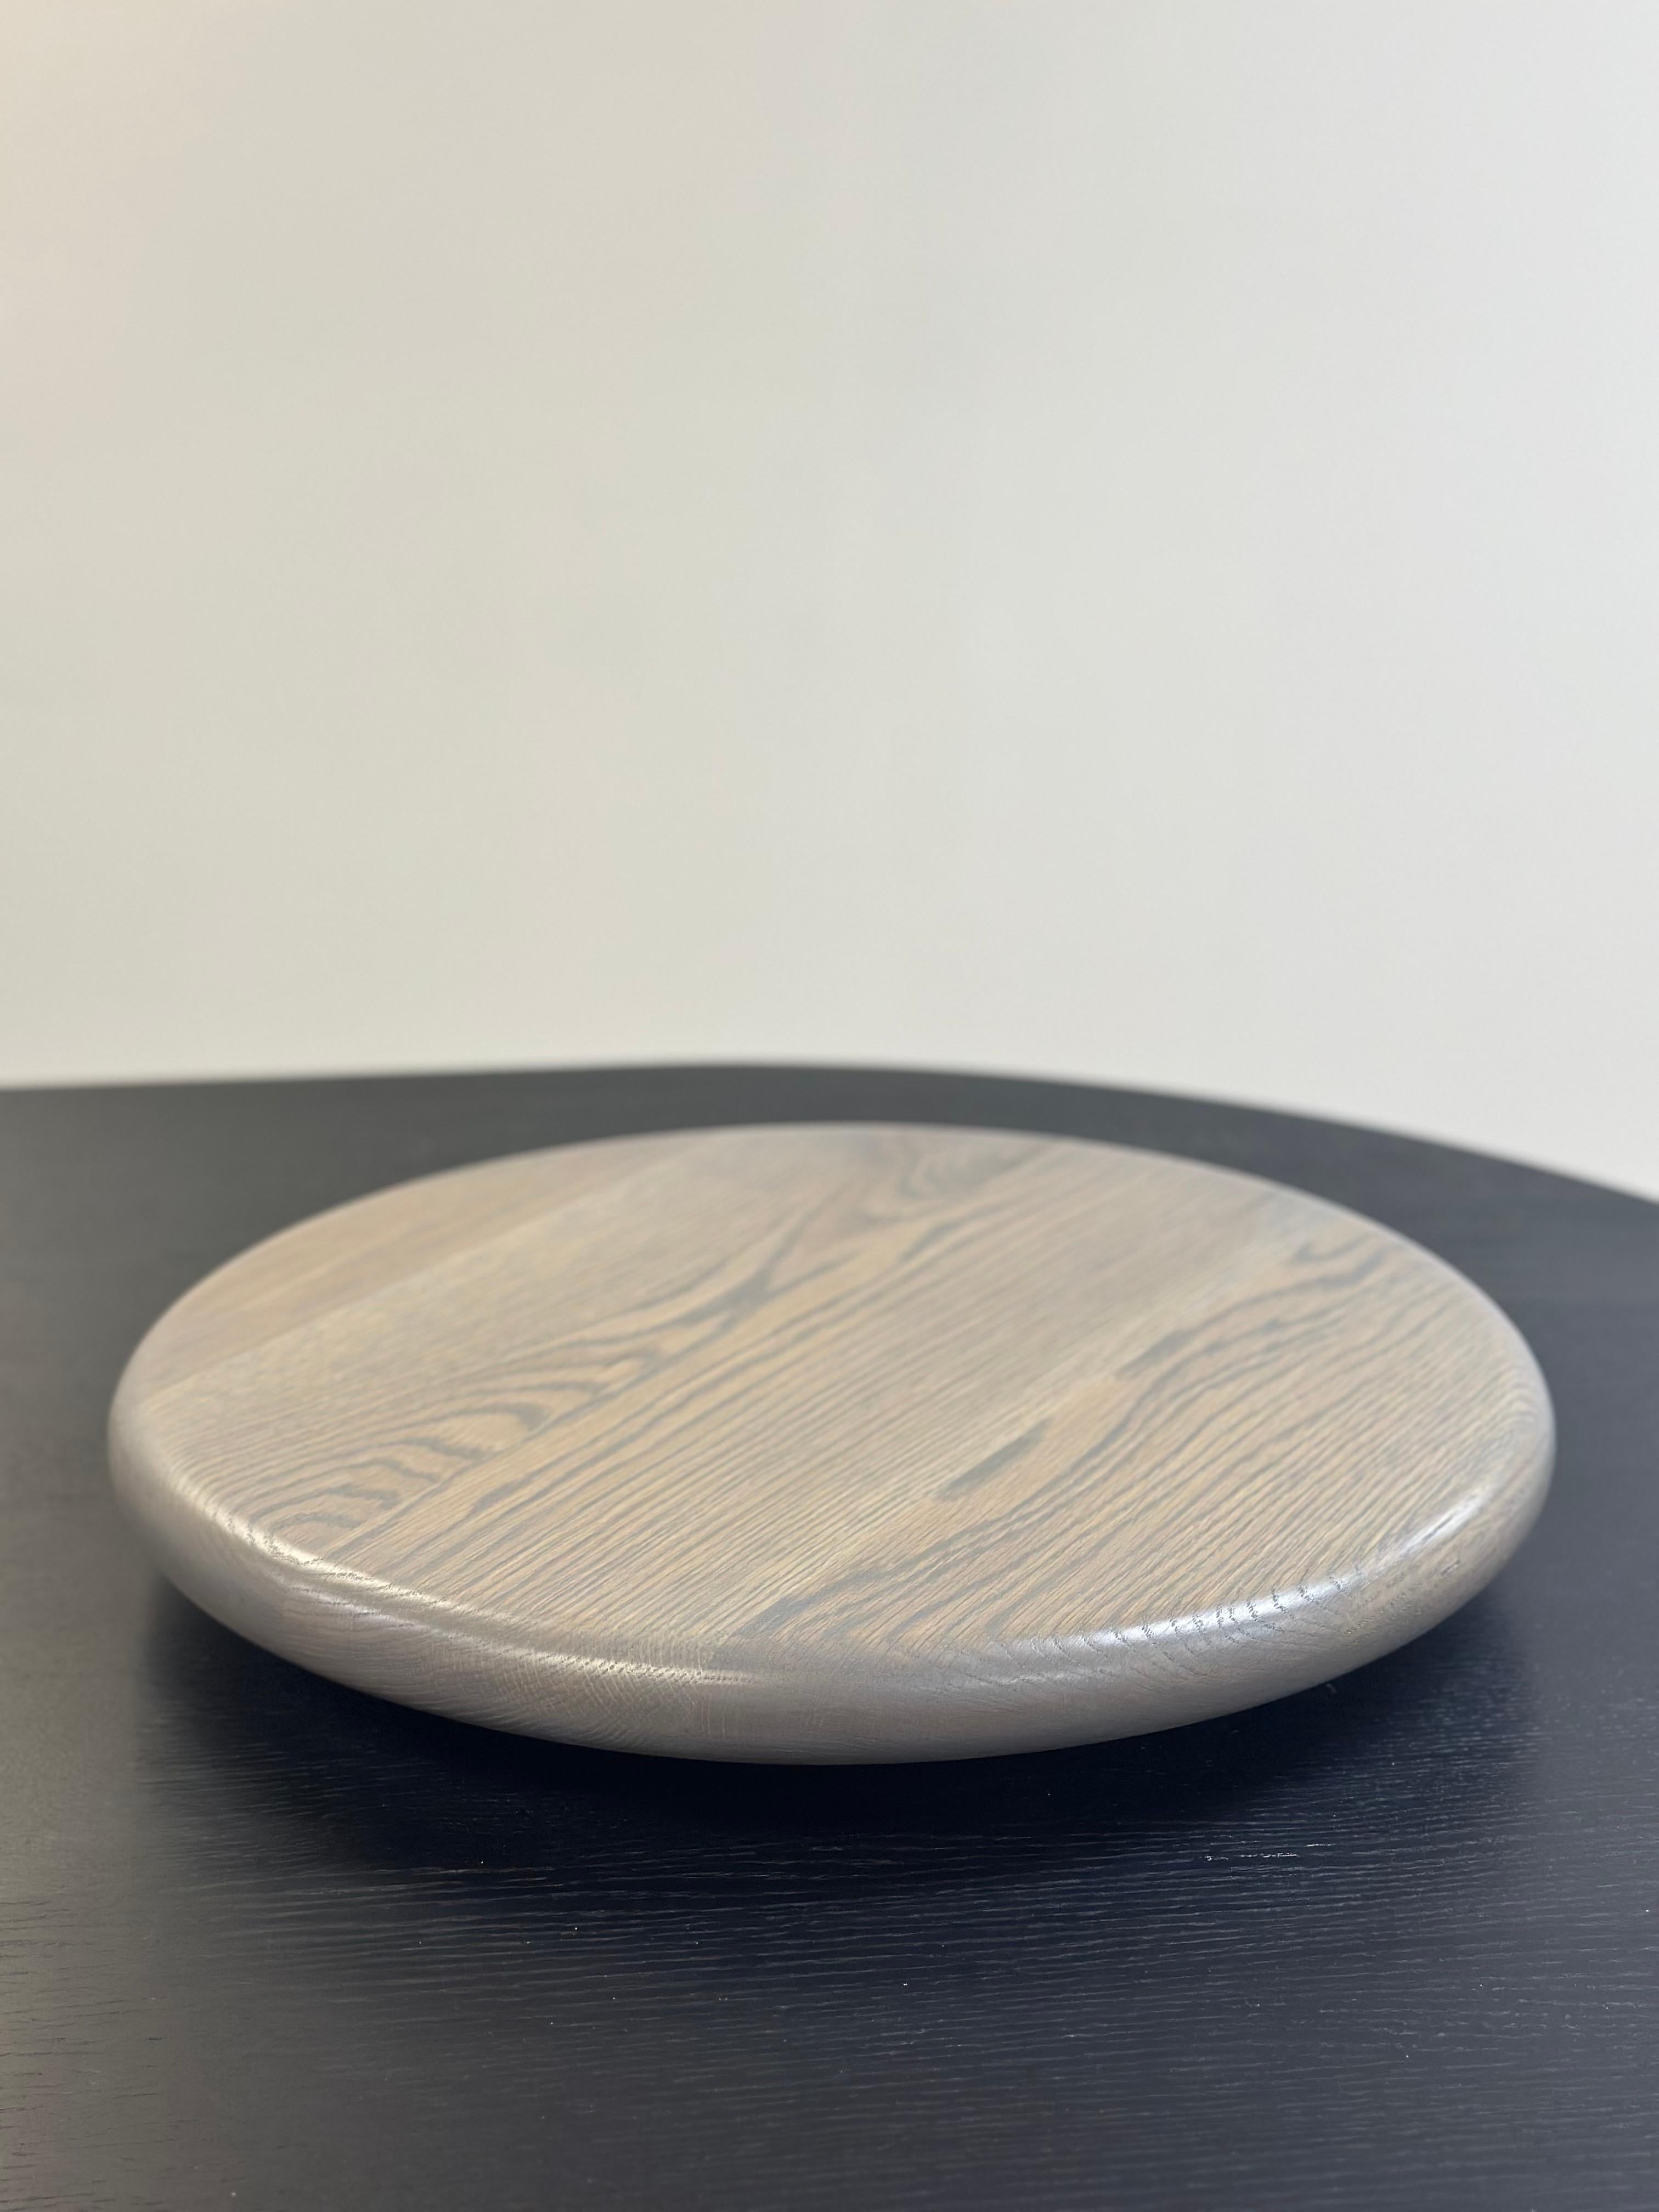 Designed to be the perfect, round functional accent to any table, our Lazy Susan is available as a solid wood or marble-topped piece. Standardized dimensions 19”Dia x 2.75